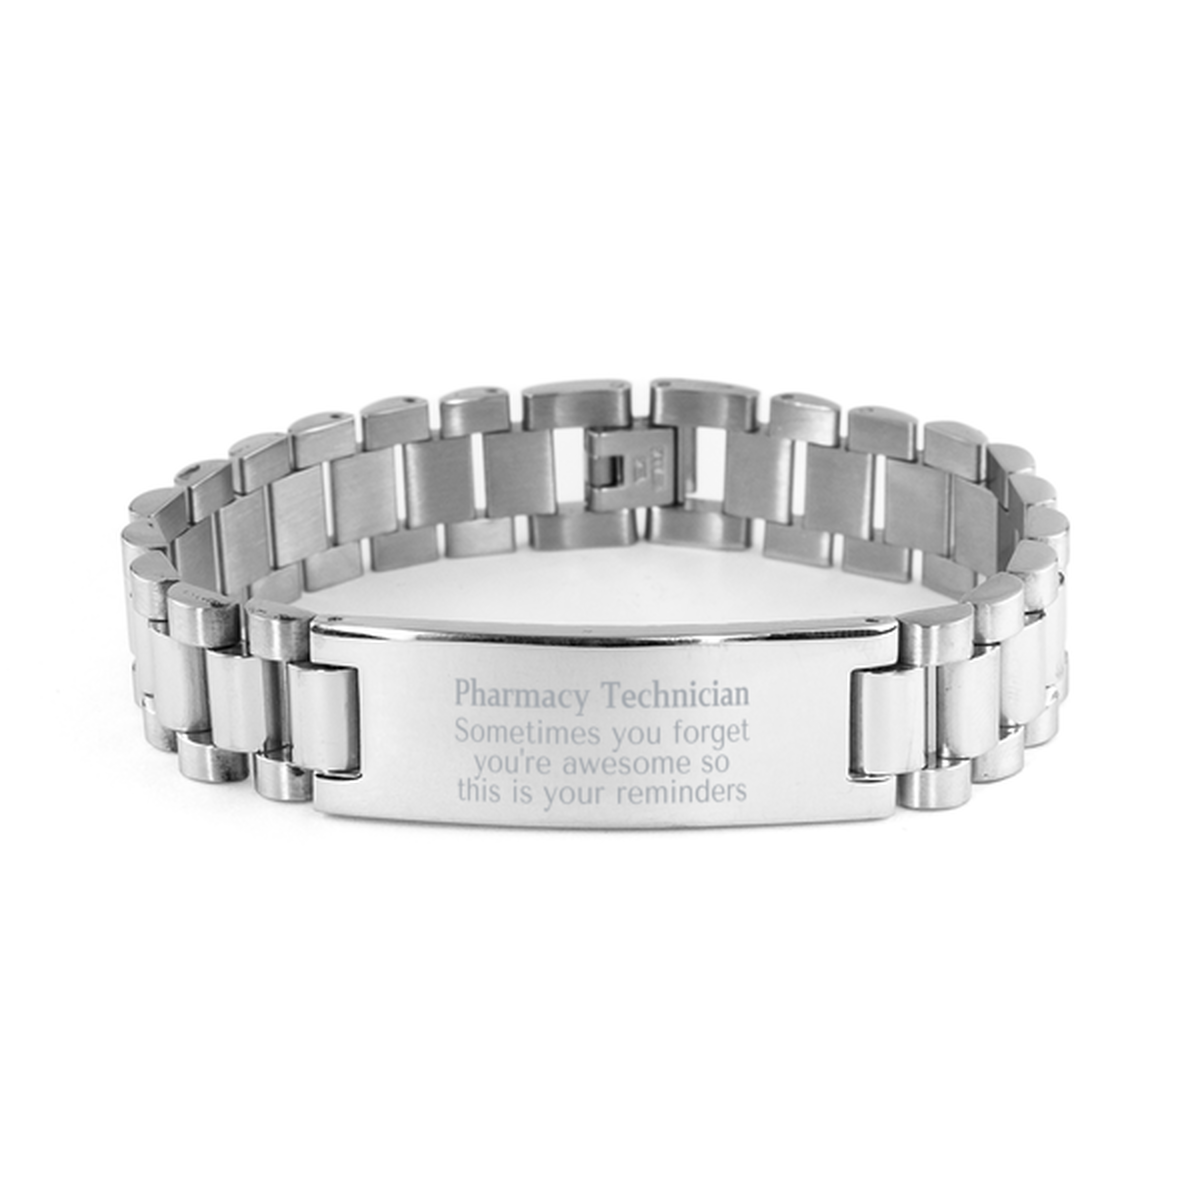 Sentimental Pharmacy Technician Ladder Stainless Steel Bracelet, Pharmacy Technician Sometimes you forget you're awesome so this is your reminders, Graduation Christmas Birthday Gifts for Pharmacy Technician, Men, Women, Coworkers